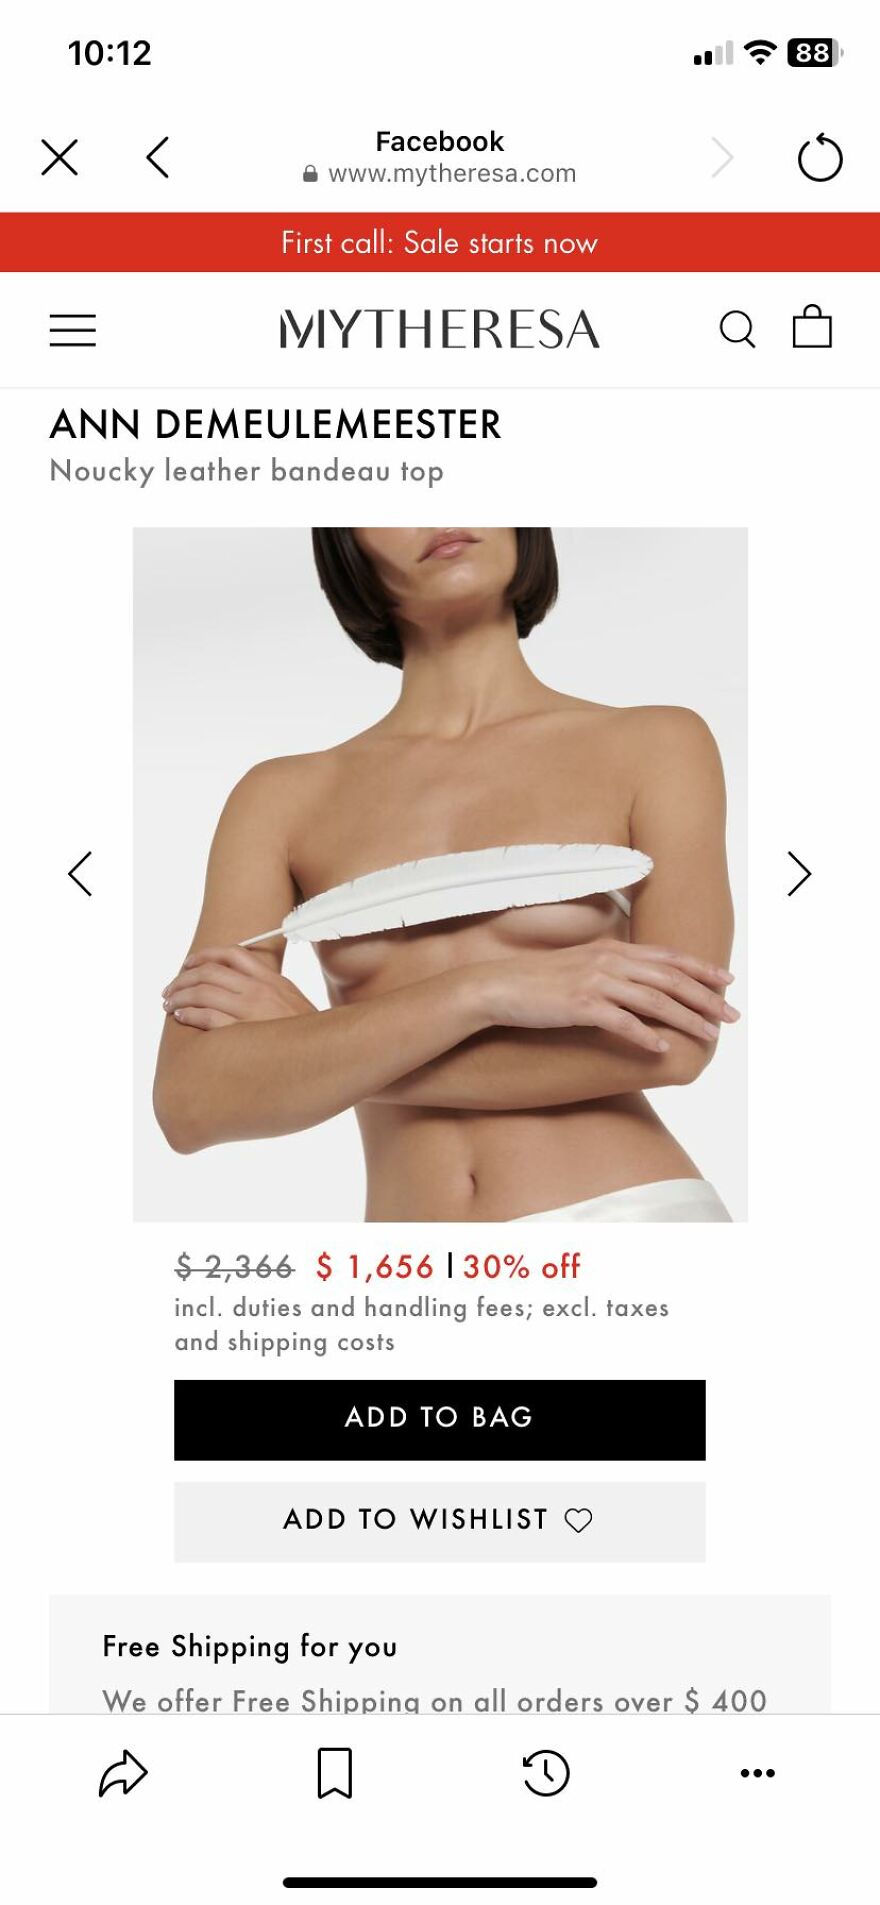 Guys, It’s On Sale! Grab Two! Would Make A Great Christmas Gift 🤪😂